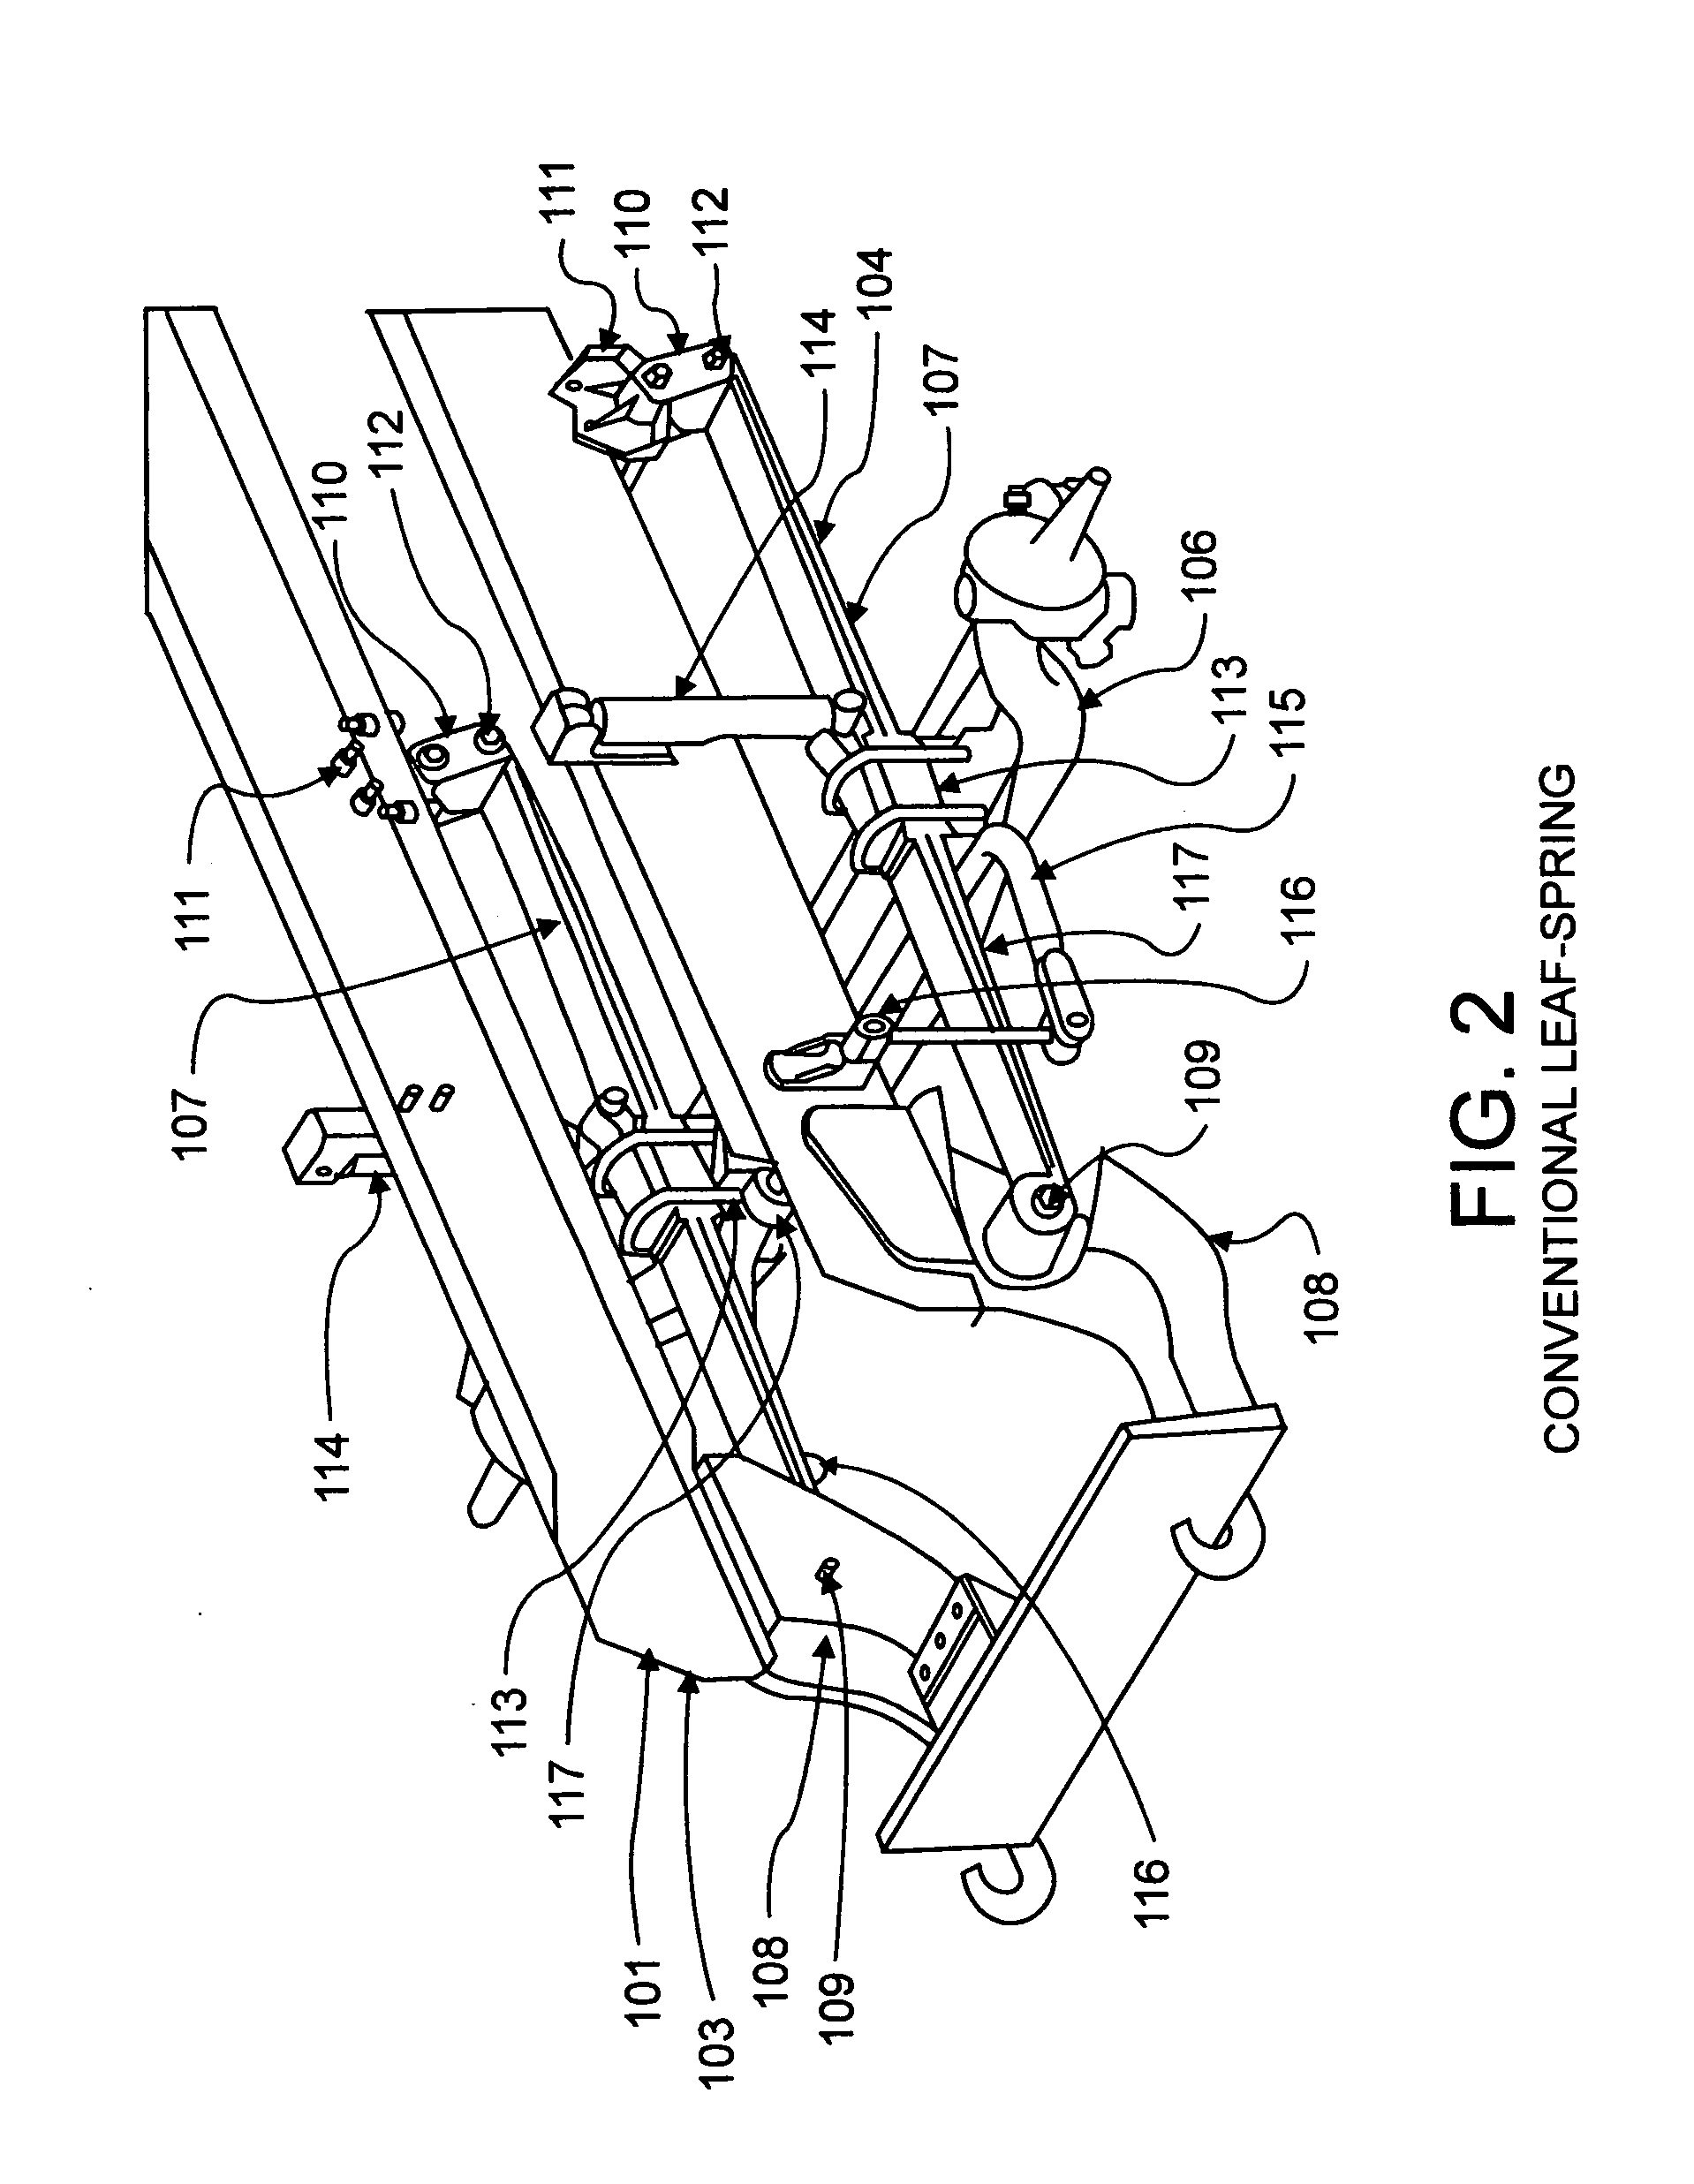 Leaf spring with high auxiliary roll stiffness